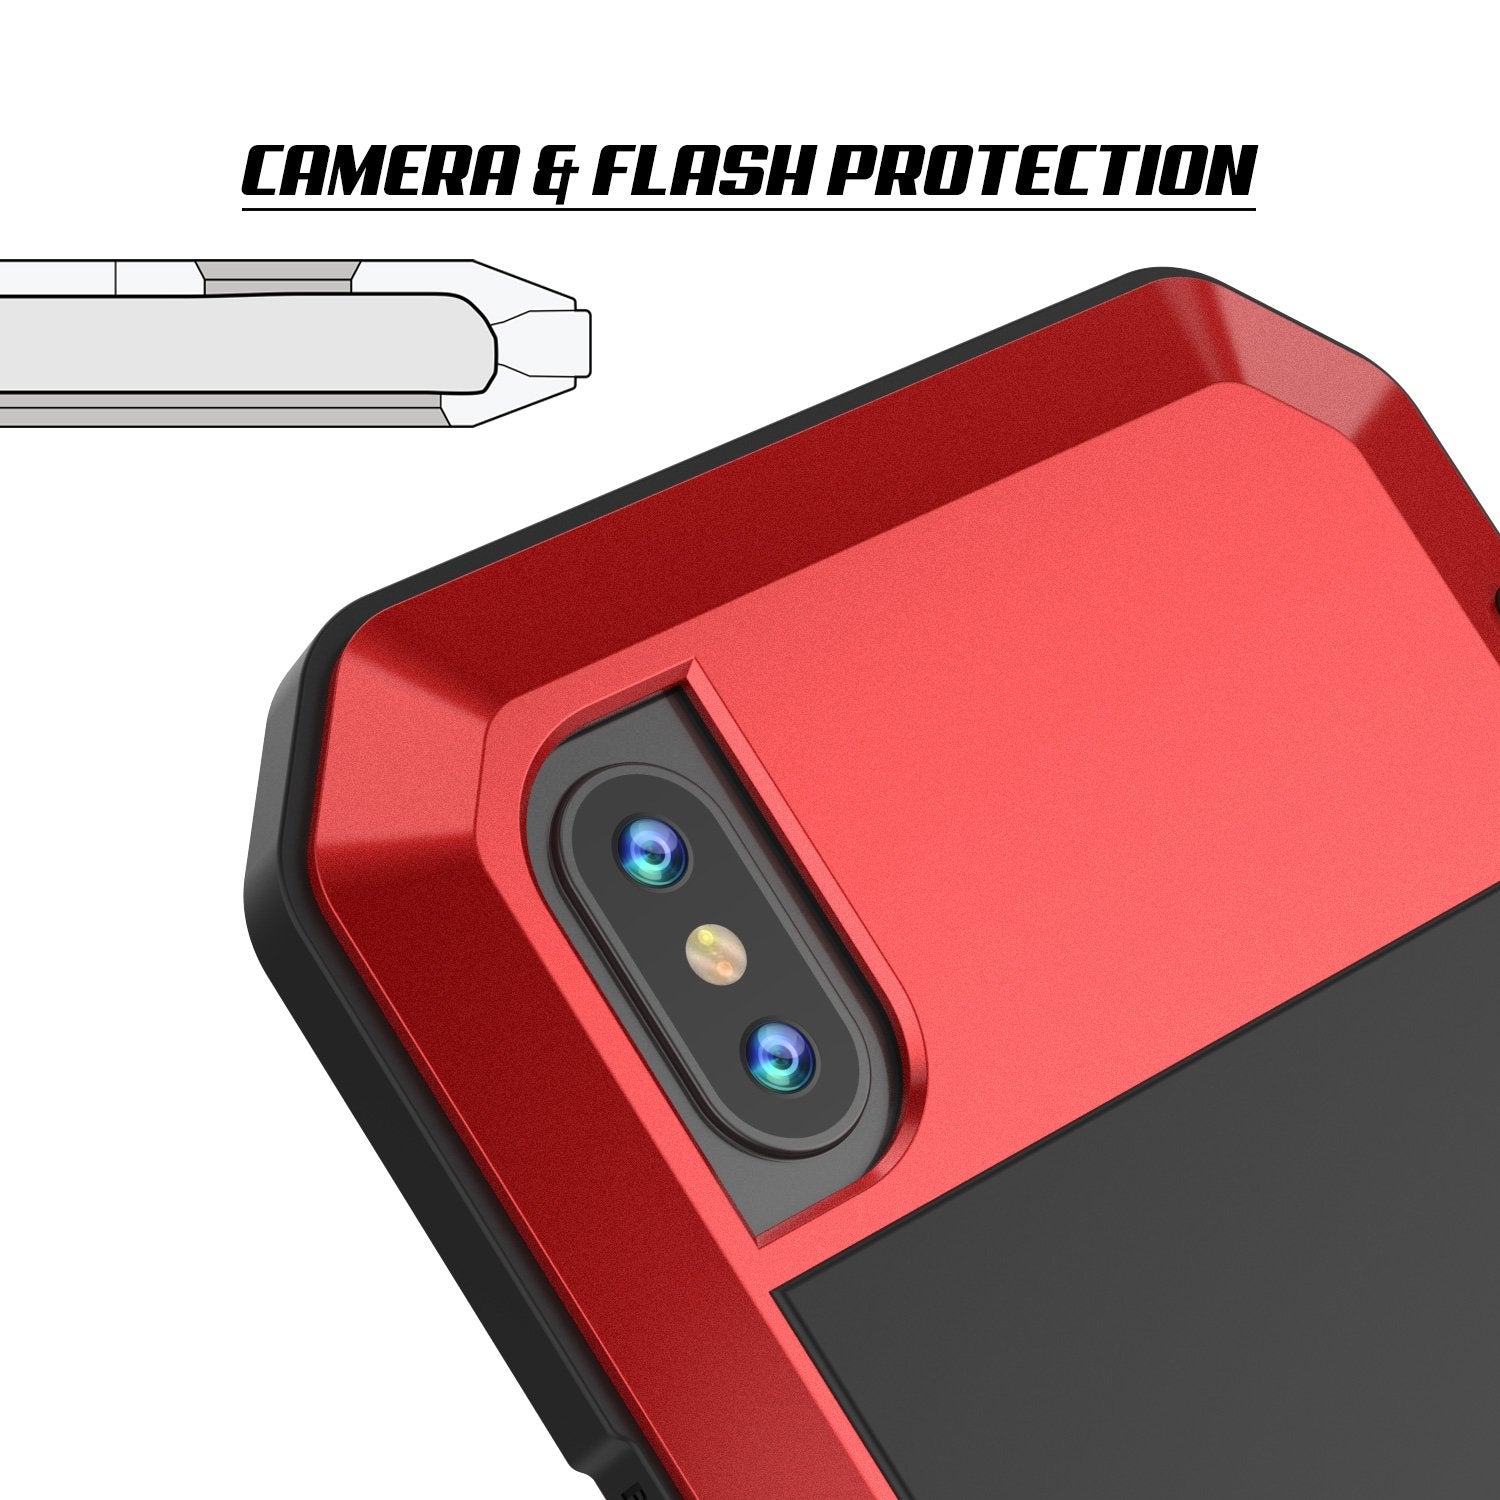 iPhone X Metal Case, Heavy Duty Military Grade Rugged Red Armor Cover [shock proof] Hybrid Full Body Hard Aluminum & TPU Design